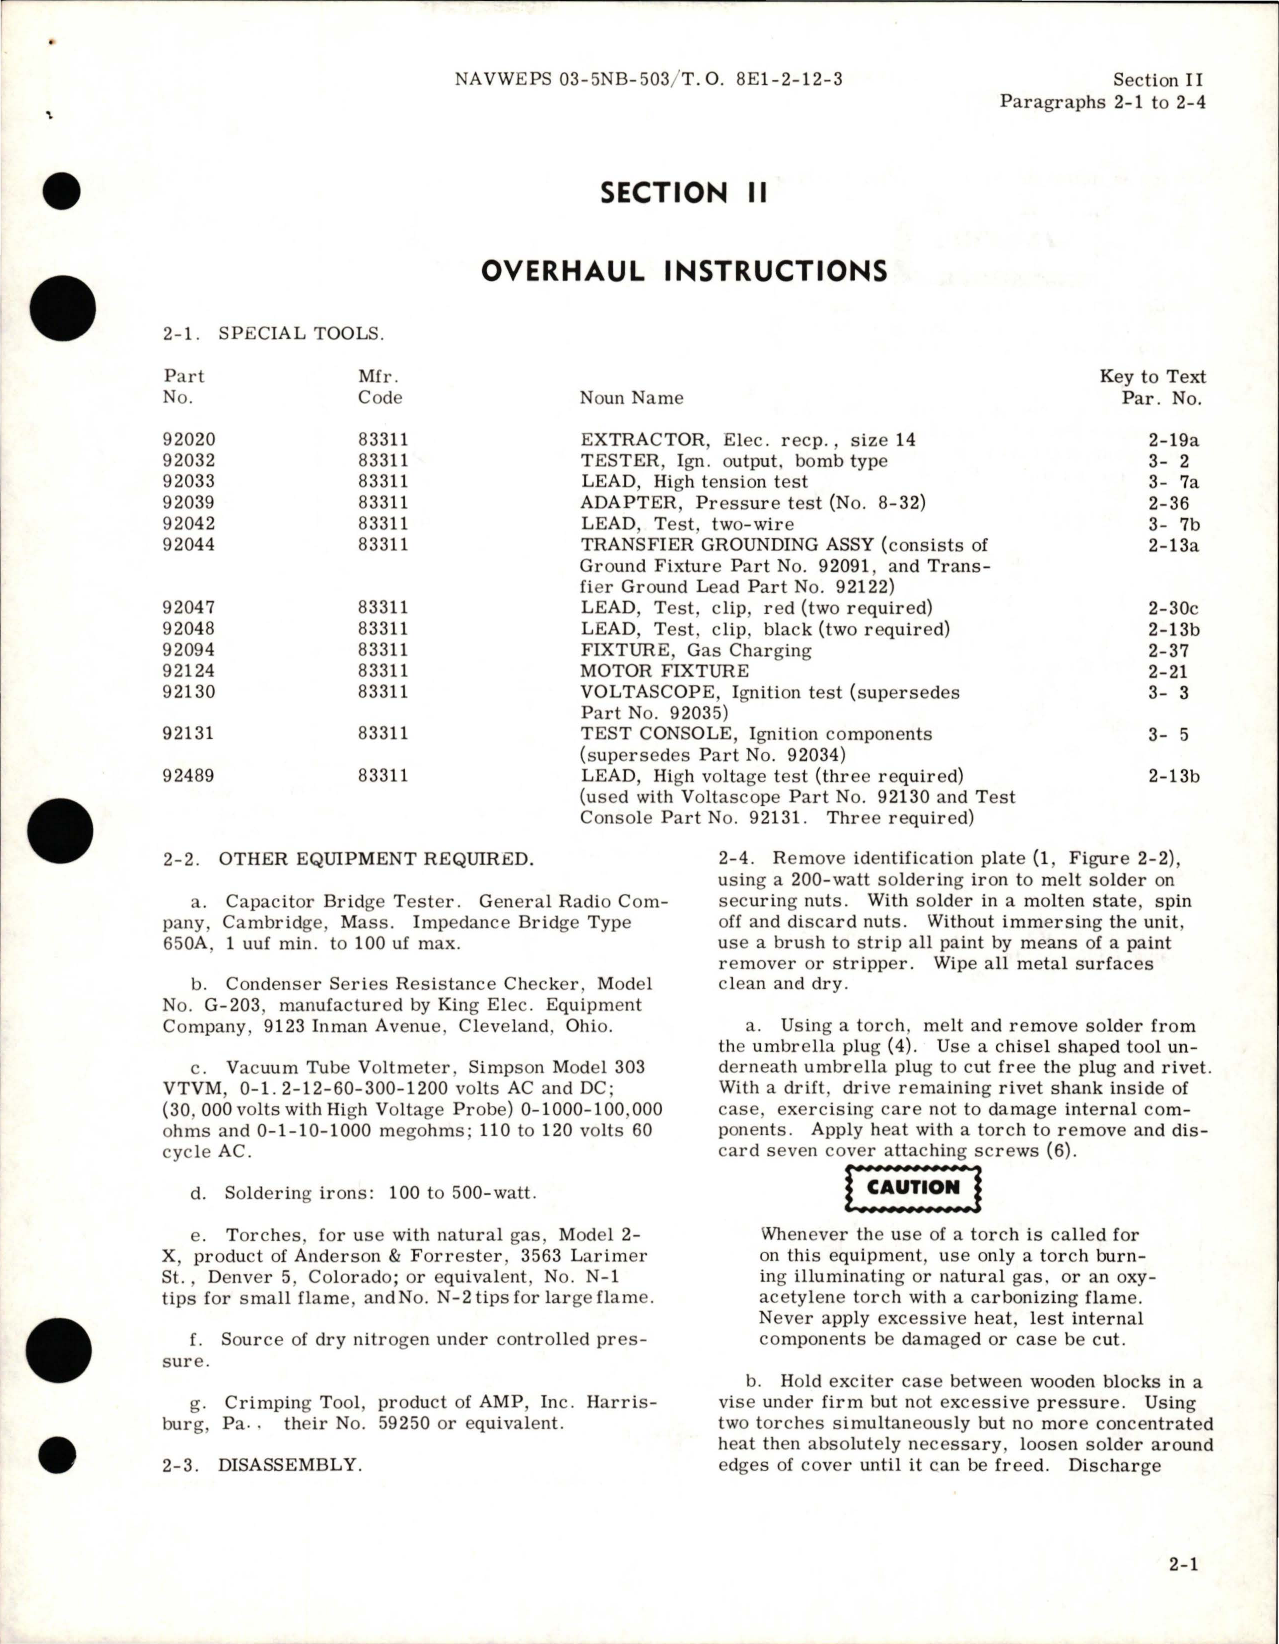 Sample page 7 from AirCorps Library document: Overhaul Instructions for Ignition Exciters - Parts 14800-11 and 15700-10 